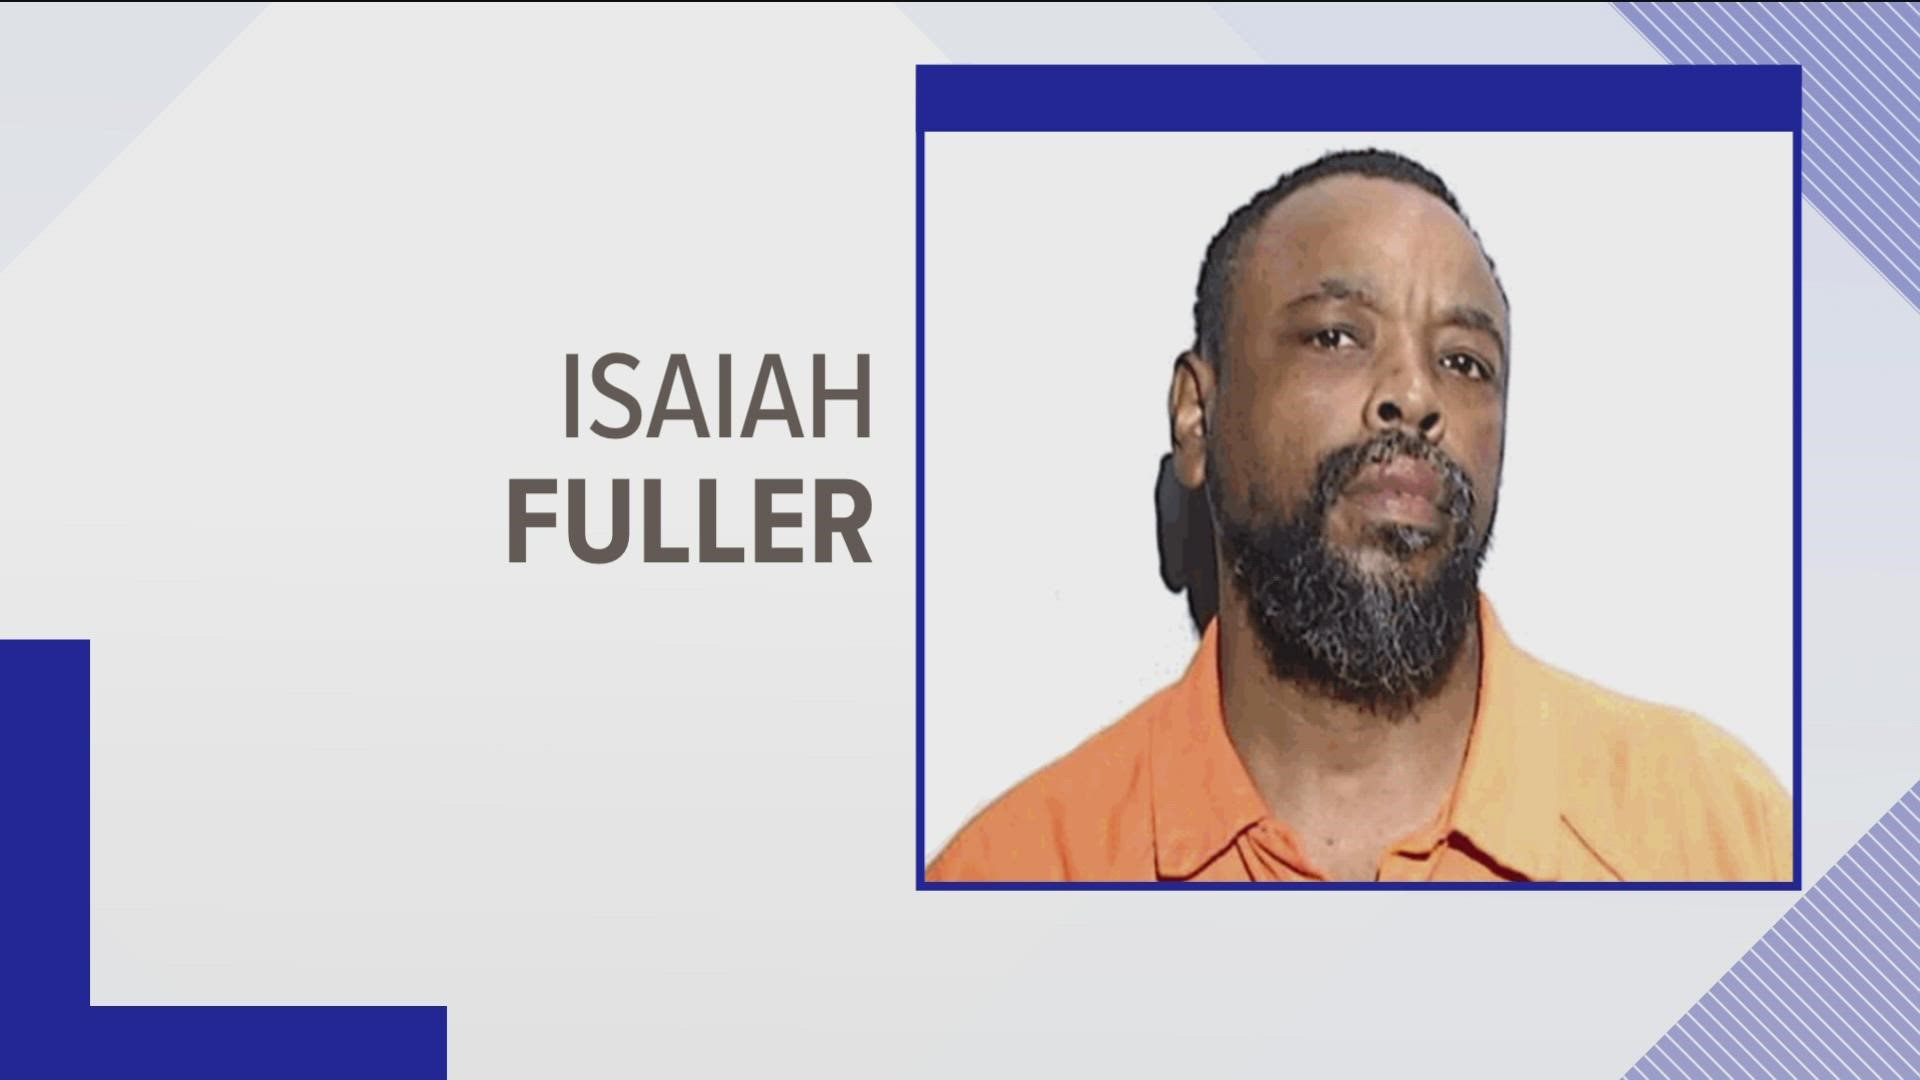 45-year-old Isaiah Fuller was indicted Thursday for the death of 40-year-old Gerrard Jackson. Jackson died from head trauma on May 11 in central Toledo.